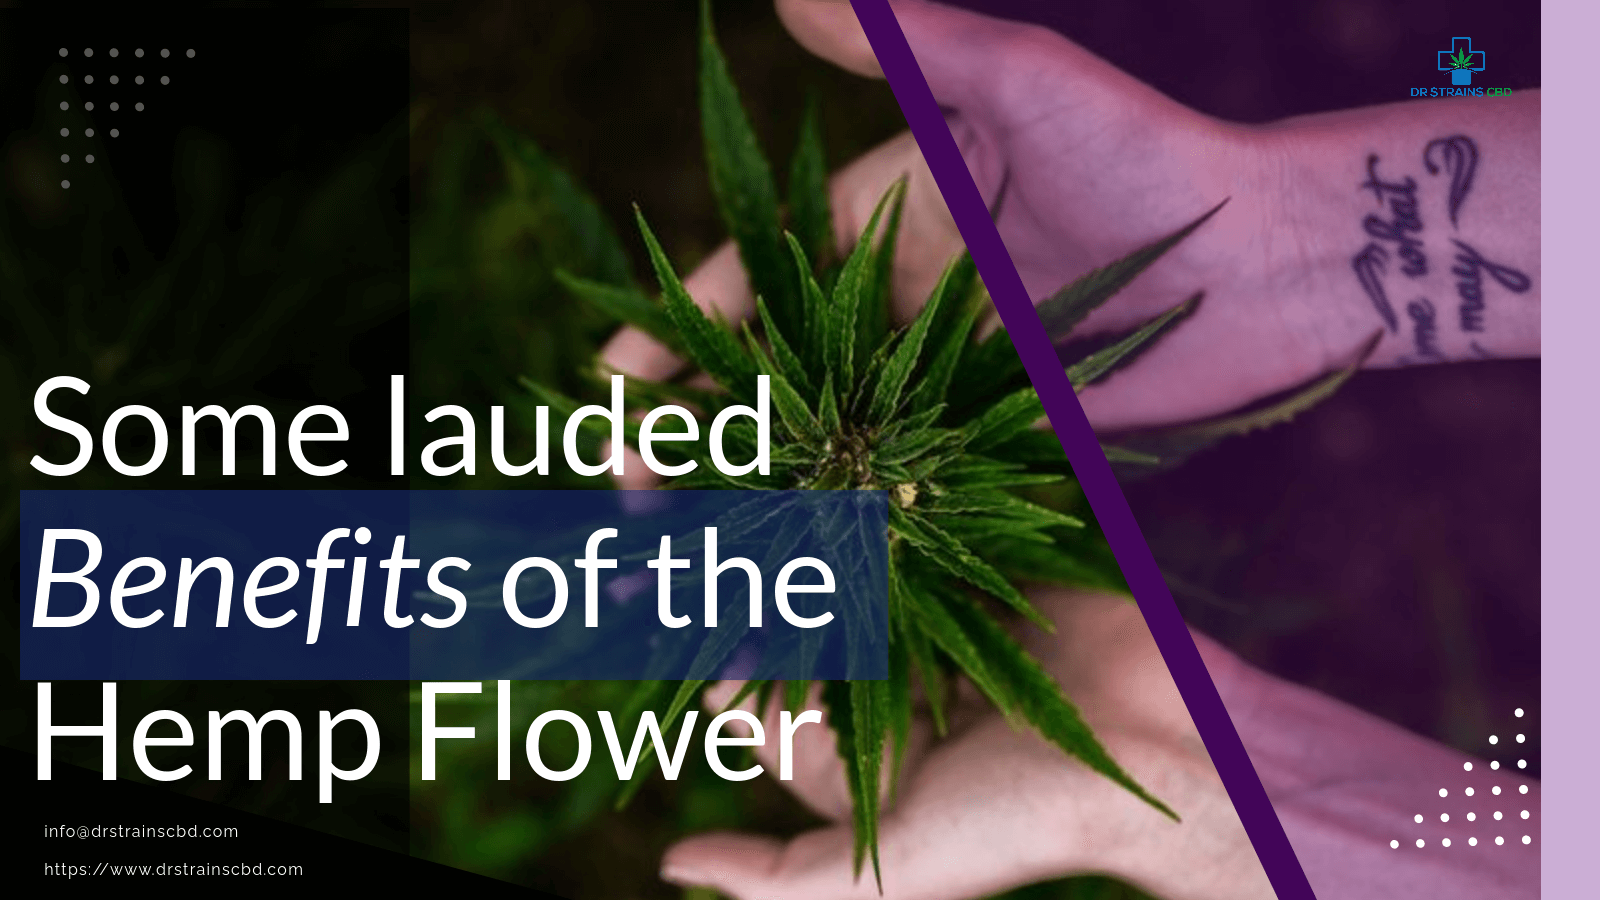 Some lauded benefits of the Hemp Flower